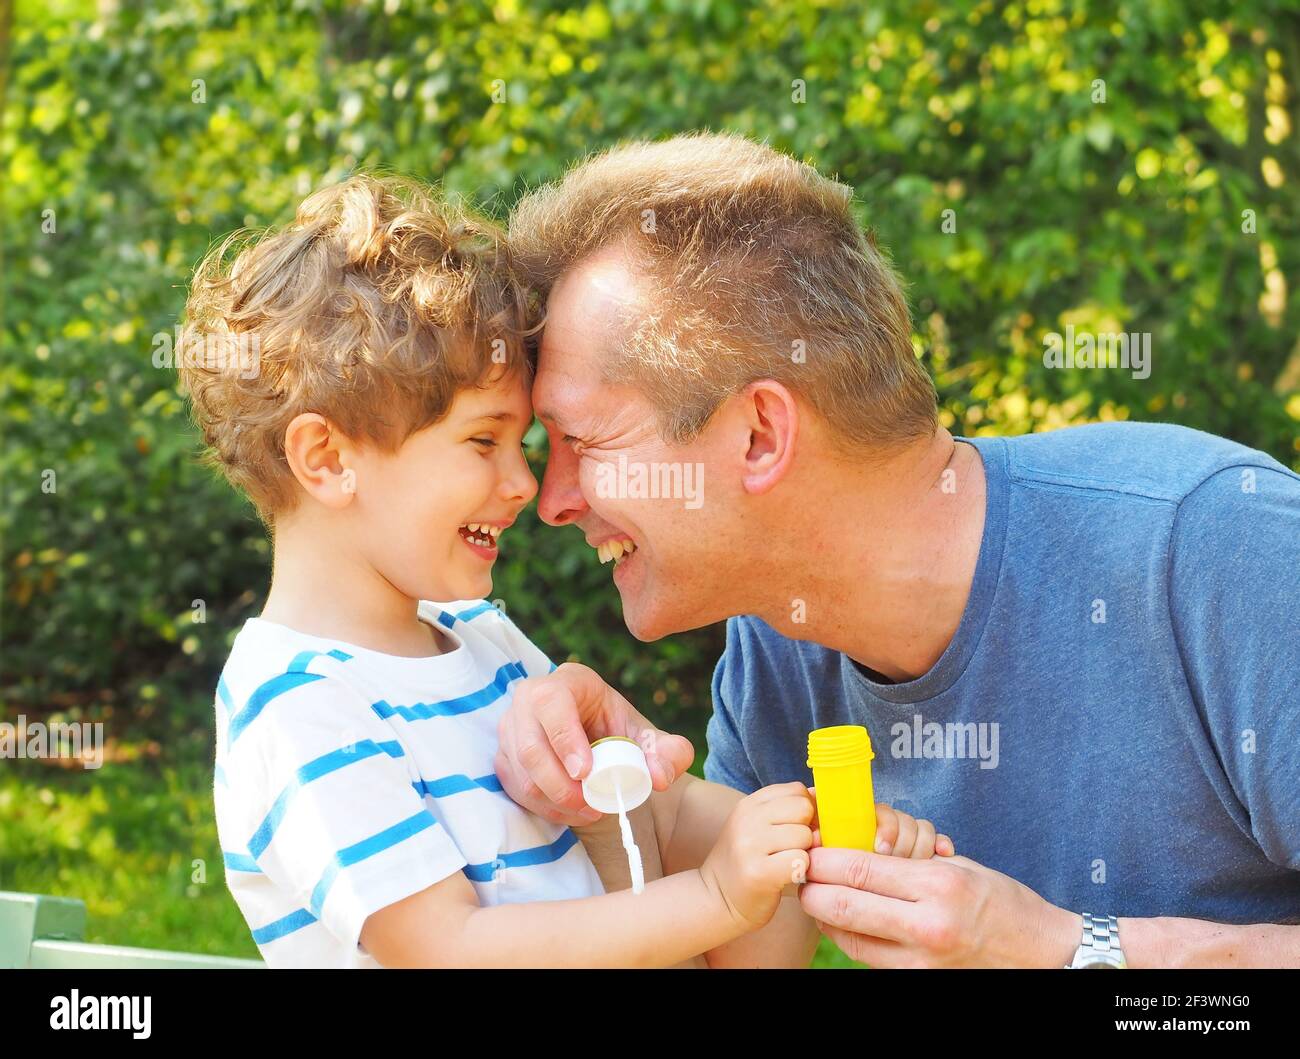 Father and son blow bubbles. They enjoy communicating with each other, have fun and laugh. Stock Photo